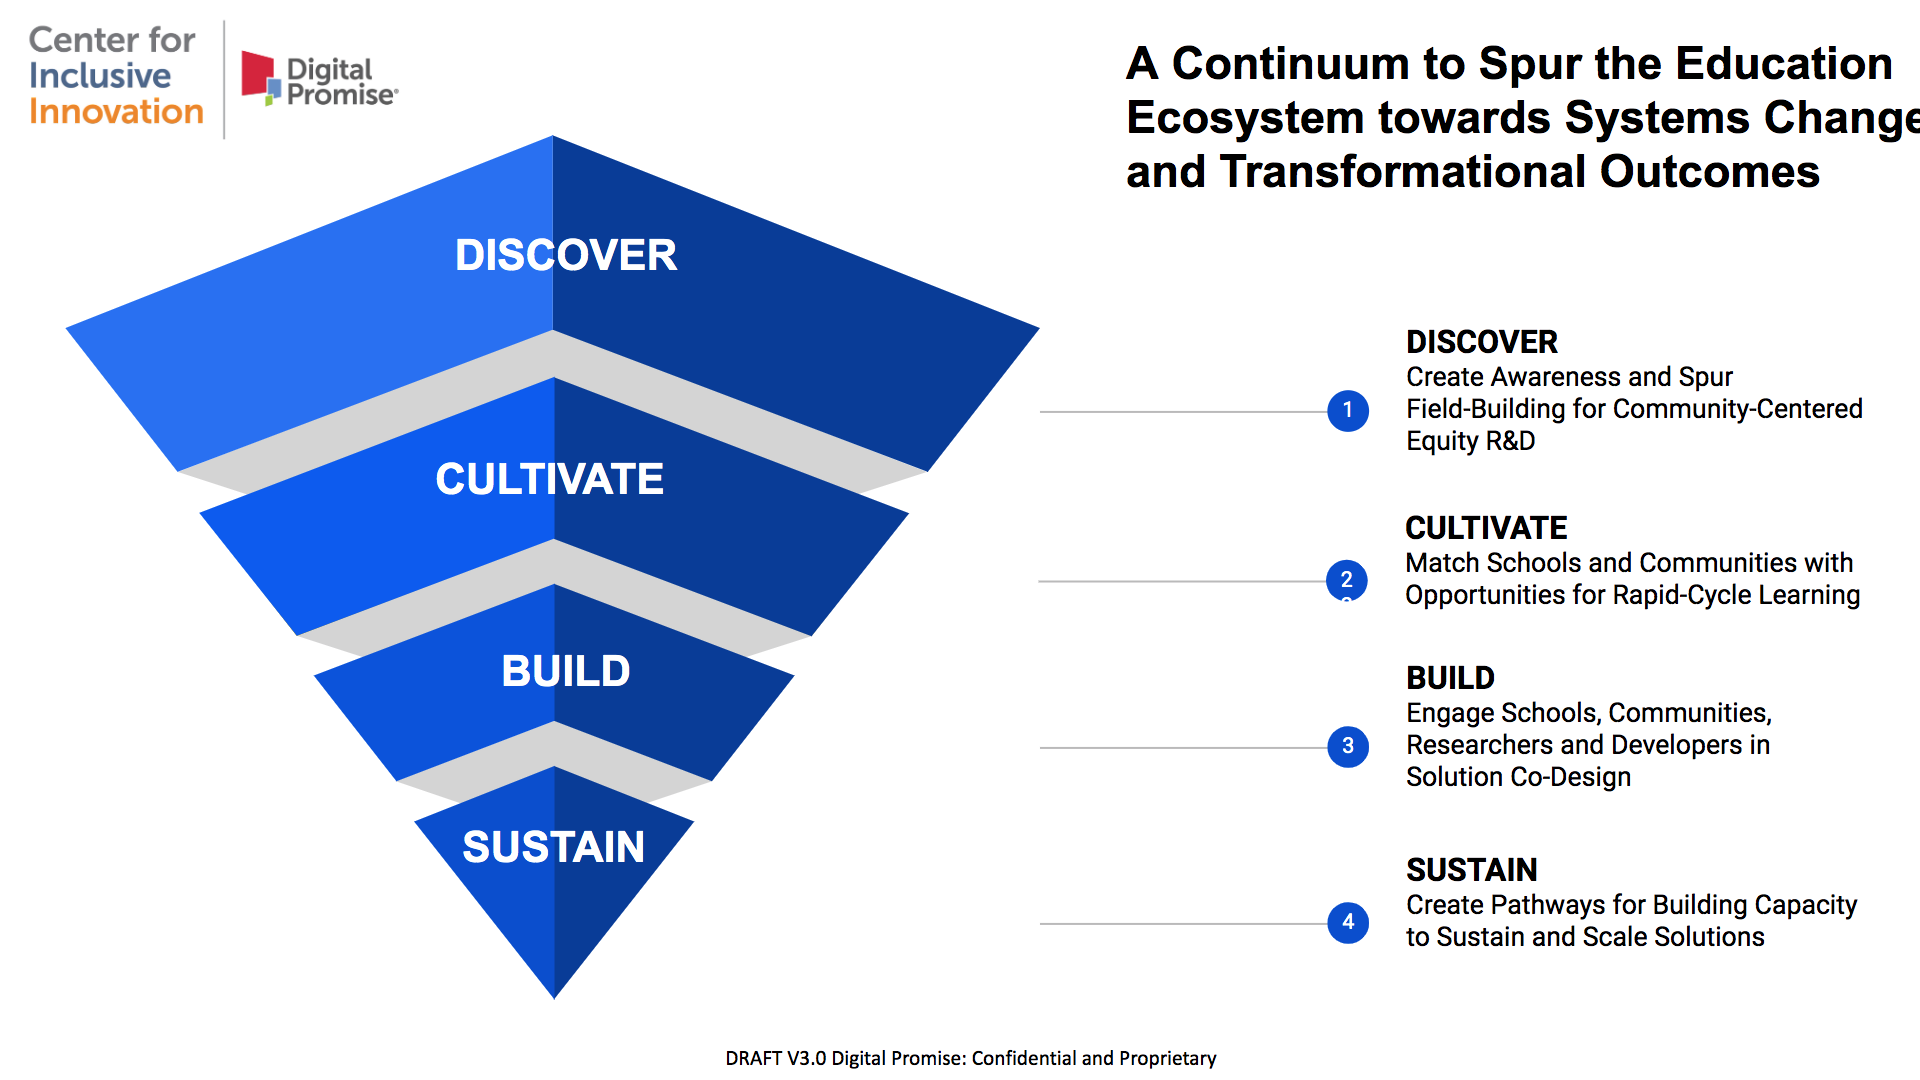 A Continuum to Spur the Education Ecosystem towards Systems Change and Transformational Outcomes